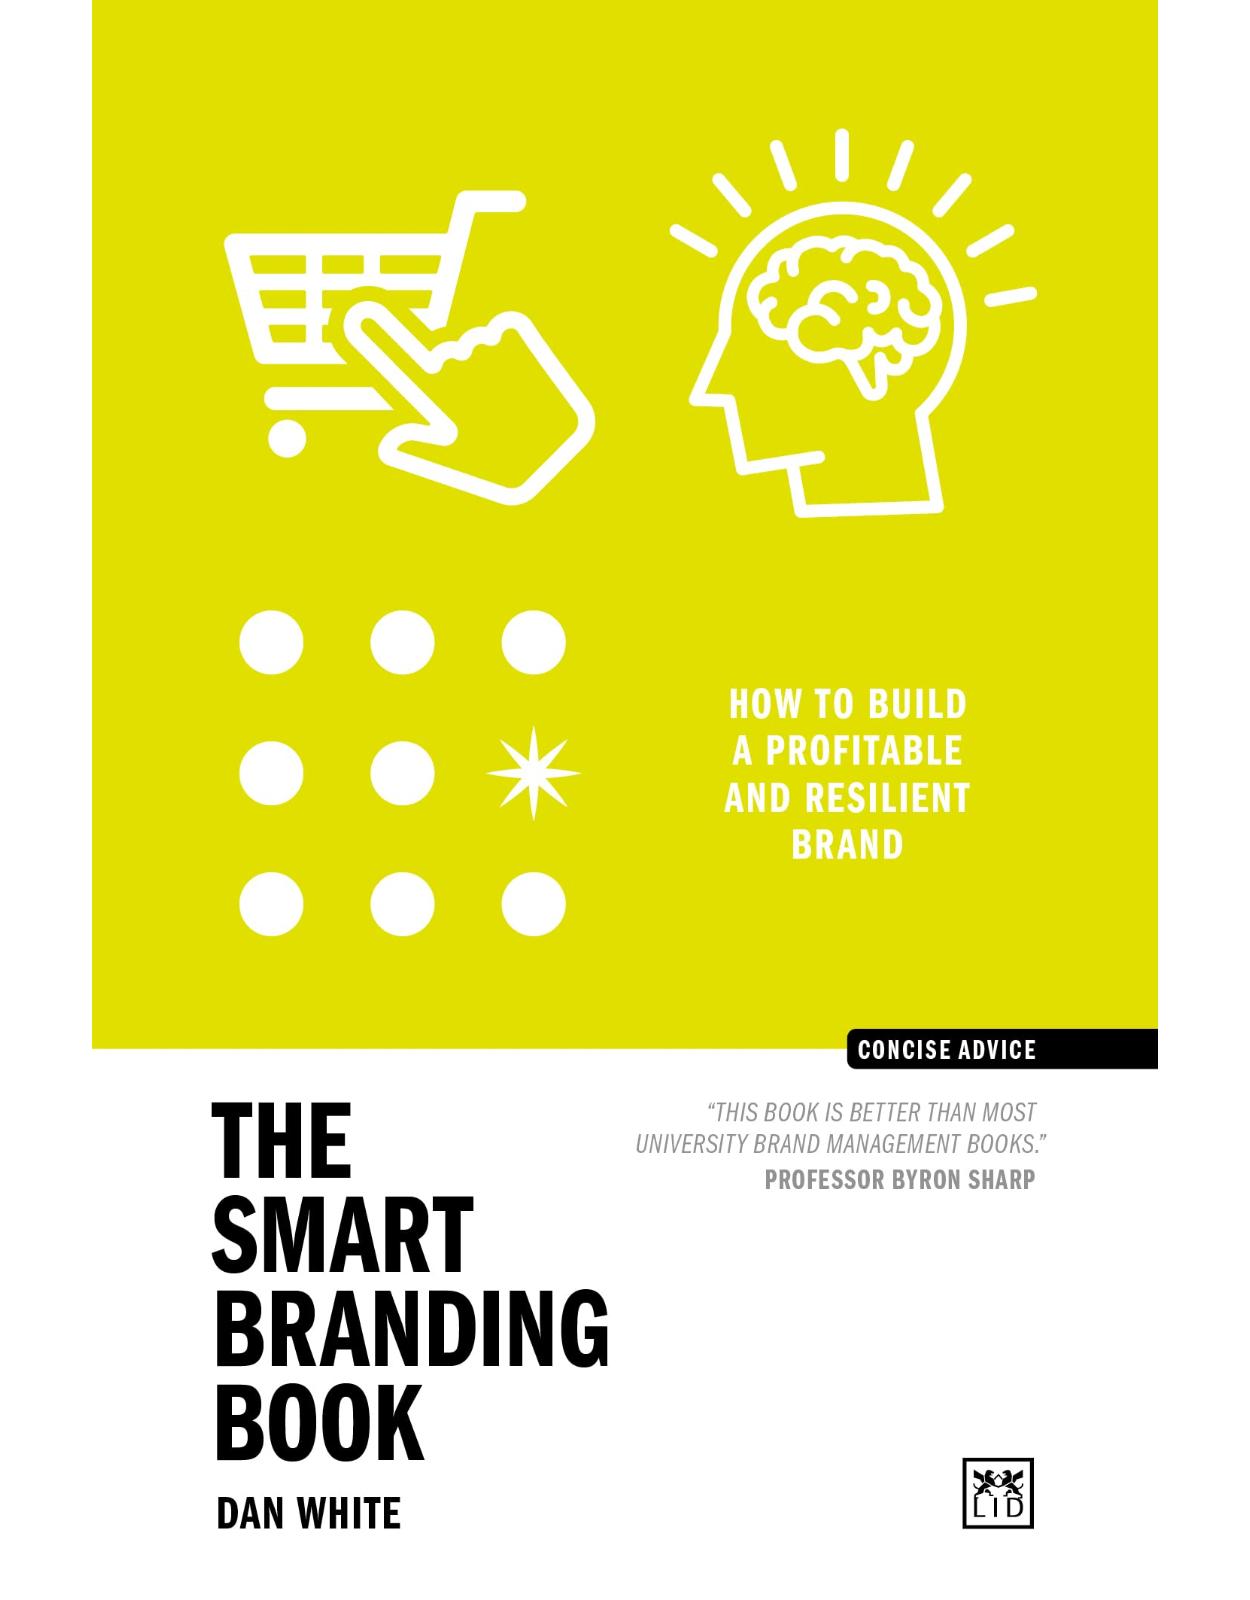 The Smart Branding Book: How to build a profitable and resilient brand